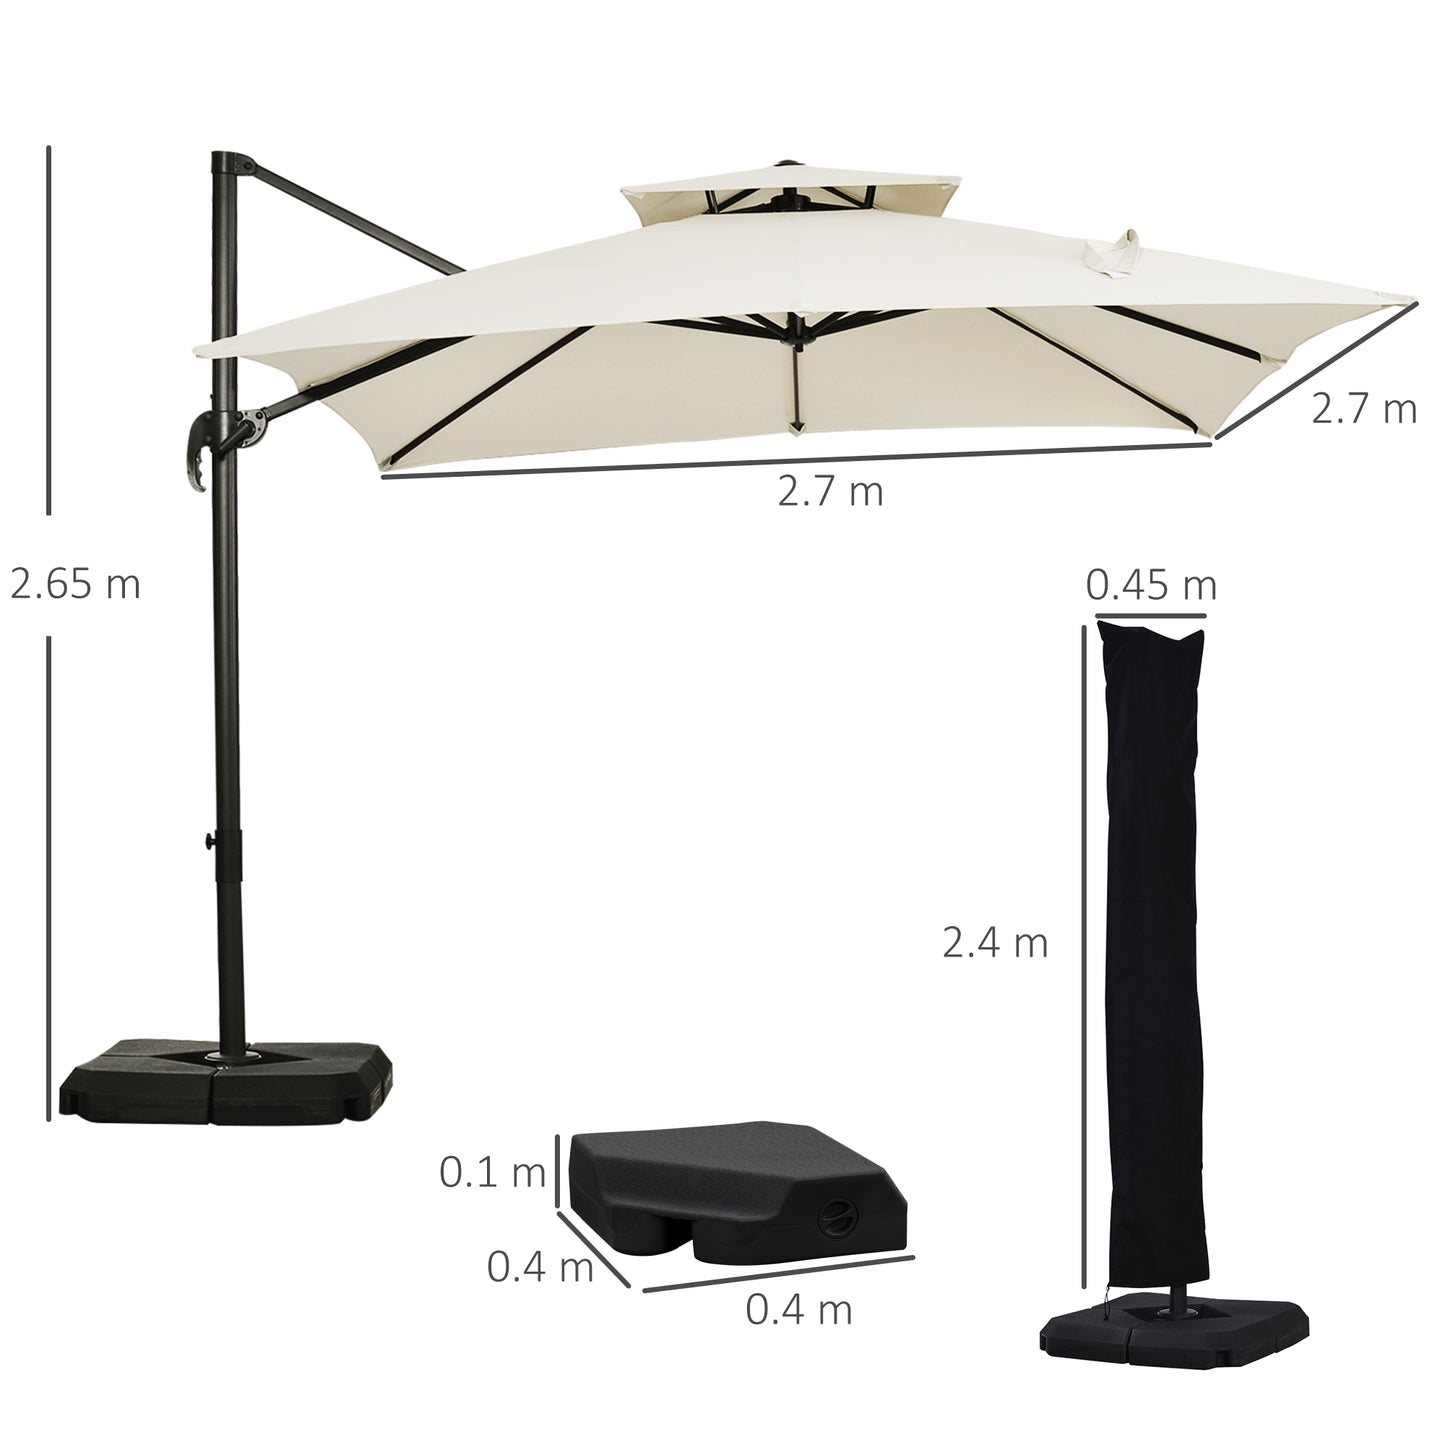 Outsunny 3 x 3(m) Garden Cantilever Parasol with Crank and Tilt, Square Overhanging Patio Umbrella with 360° Rotation, Base Weights and Cover, Beige